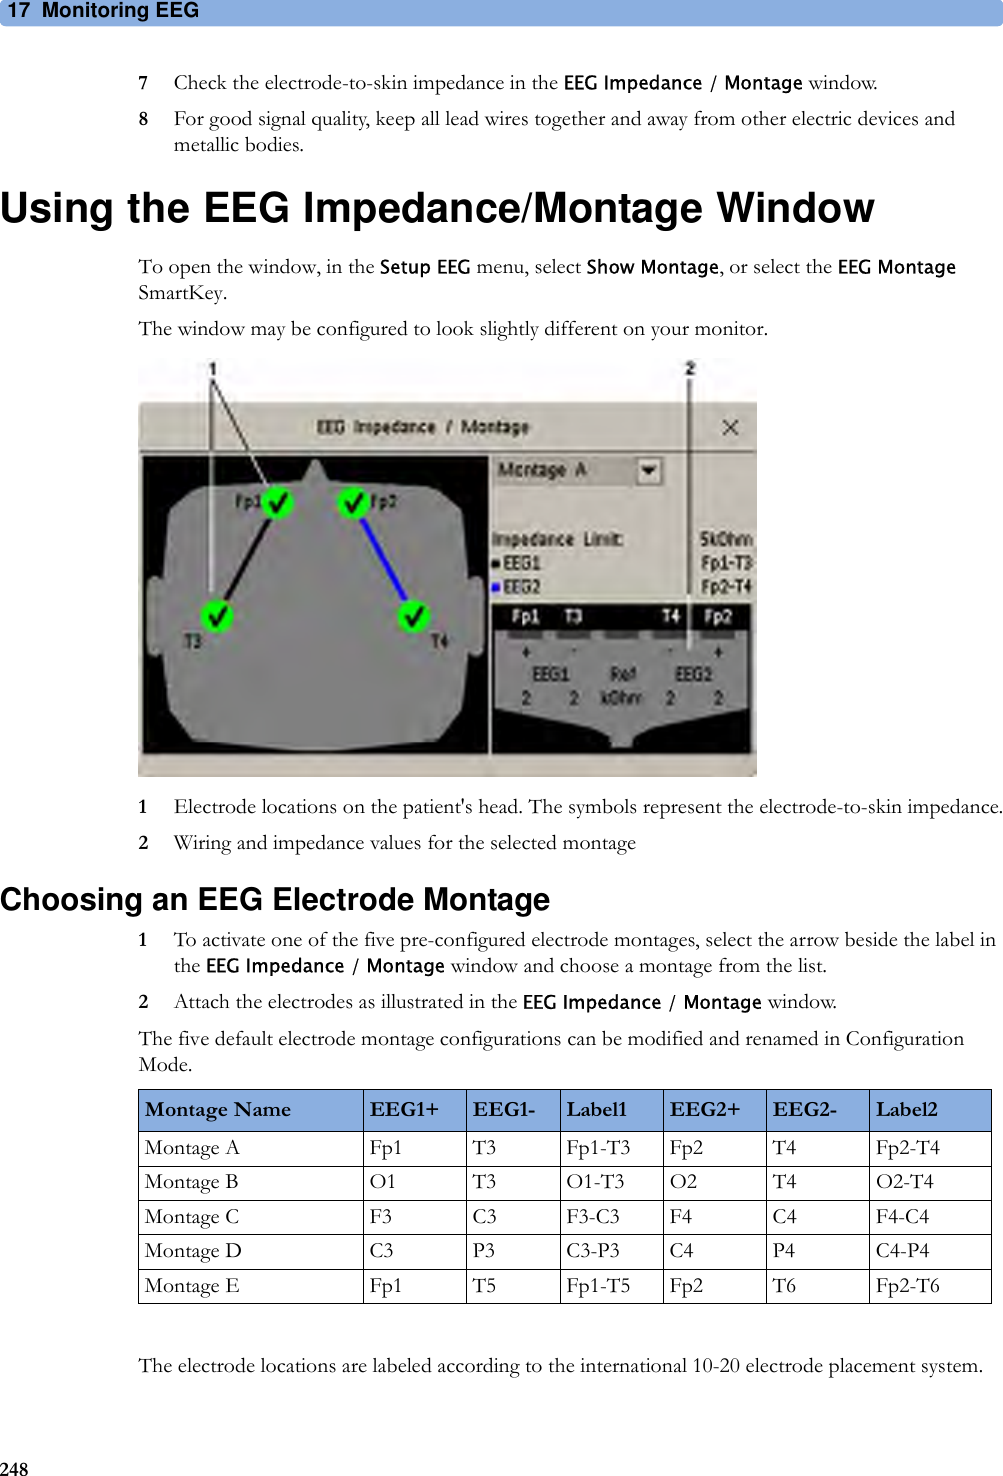 17 Monitoring EEG2487Check the electrode-to-skin impedance in the EEG Impedance / Montage window.8For good signal quality, keep all lead wires together and away from other electric devices and metallic bodies.Using the EEG Impedance/Montage WindowTo open the window, in the Setup EEG menu, select Show Montage, or select the EEG Montage SmartKey.The window may be configured to look slightly different on your monitor.1Electrode locations on the patient&apos;s head. The symbols represent the electrode-to-skin impedance.2Wiring and impedance values for the selected montageChoosing an EEG Electrode Montage1To activate one of the five pre-configured electrode montages, select the arrow beside the label in the EEG Impedance / Montage window and choose a montage from the list.2Attach the electrodes as illustrated in the EEG Impedance / Montage window.The five default electrode montage configurations can be modified and renamed in Configuration Mode.The electrode locations are labeled according to the international 10-20 electrode placement system.Montage Name EEG1+ EEG1- Label1 EEG2+ EEG2- Label2Montage A Fp1 T3 Fp1-T3 Fp2 T4 Fp2-T4Montage B O1 T3 O1-T3 O2 T4 O2-T4Montage C F3 C3 F3-C3 F4 C4 F4-C4Montage D C3 P3 C3-P3 C4 P4 C4-P4Montage E Fp1 T5 Fp1-T5 Fp2 T6 Fp2-T6